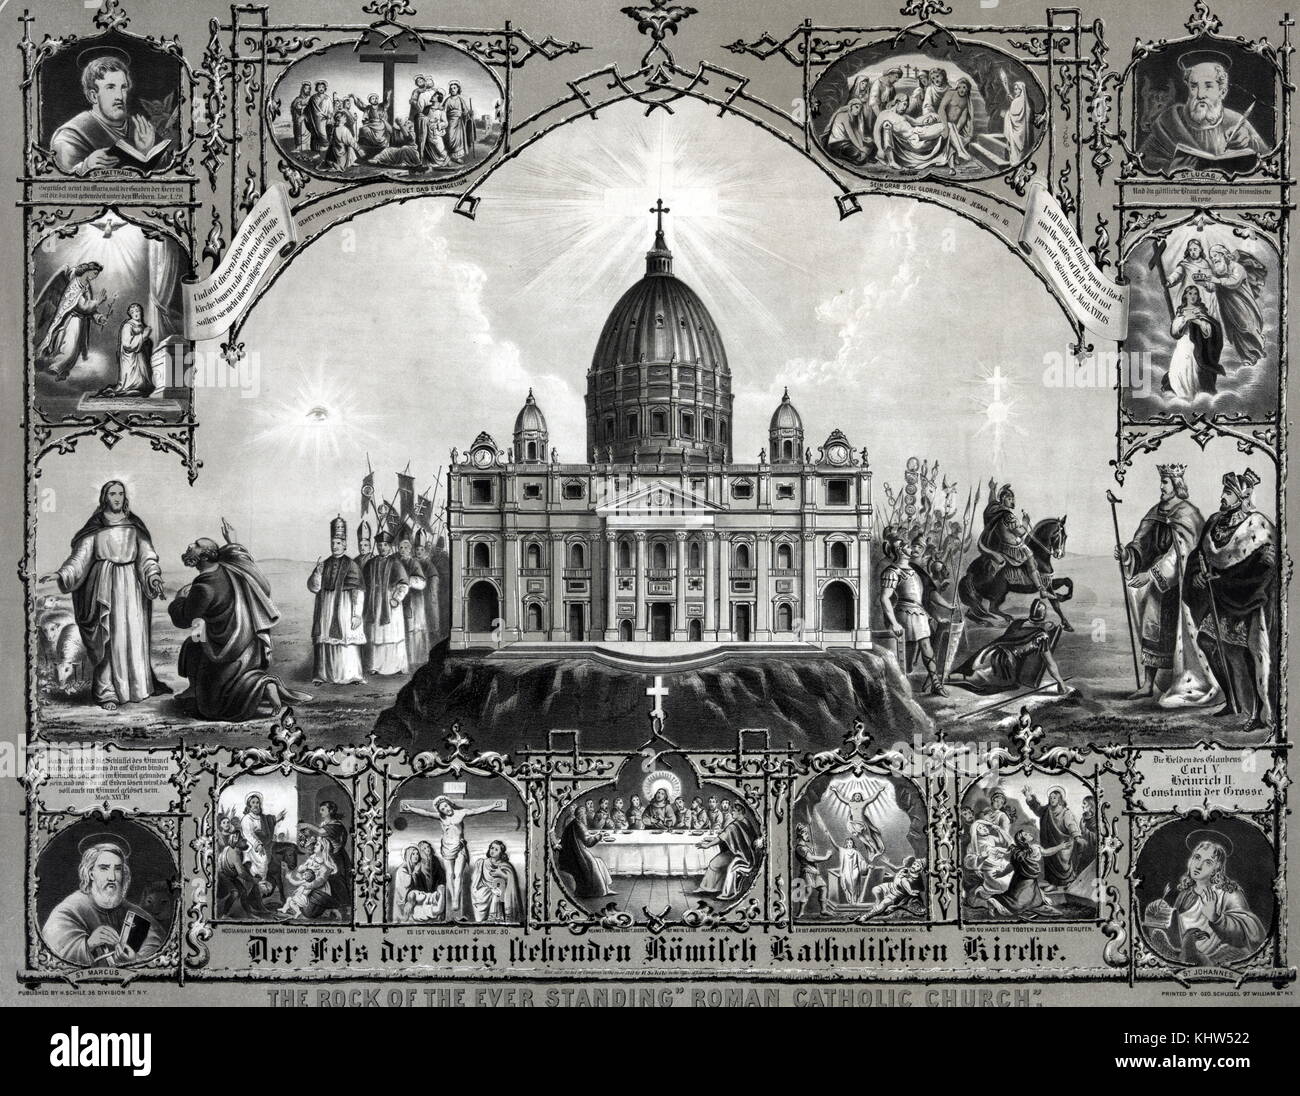 Engraving depicting St. Peter's Basilica with knights of crusades on the right and the Pope and bishops on the left. Surrounding this scene are vignettes showing biblical events, with saints at the corners. Dated 19th Century Stock Photo